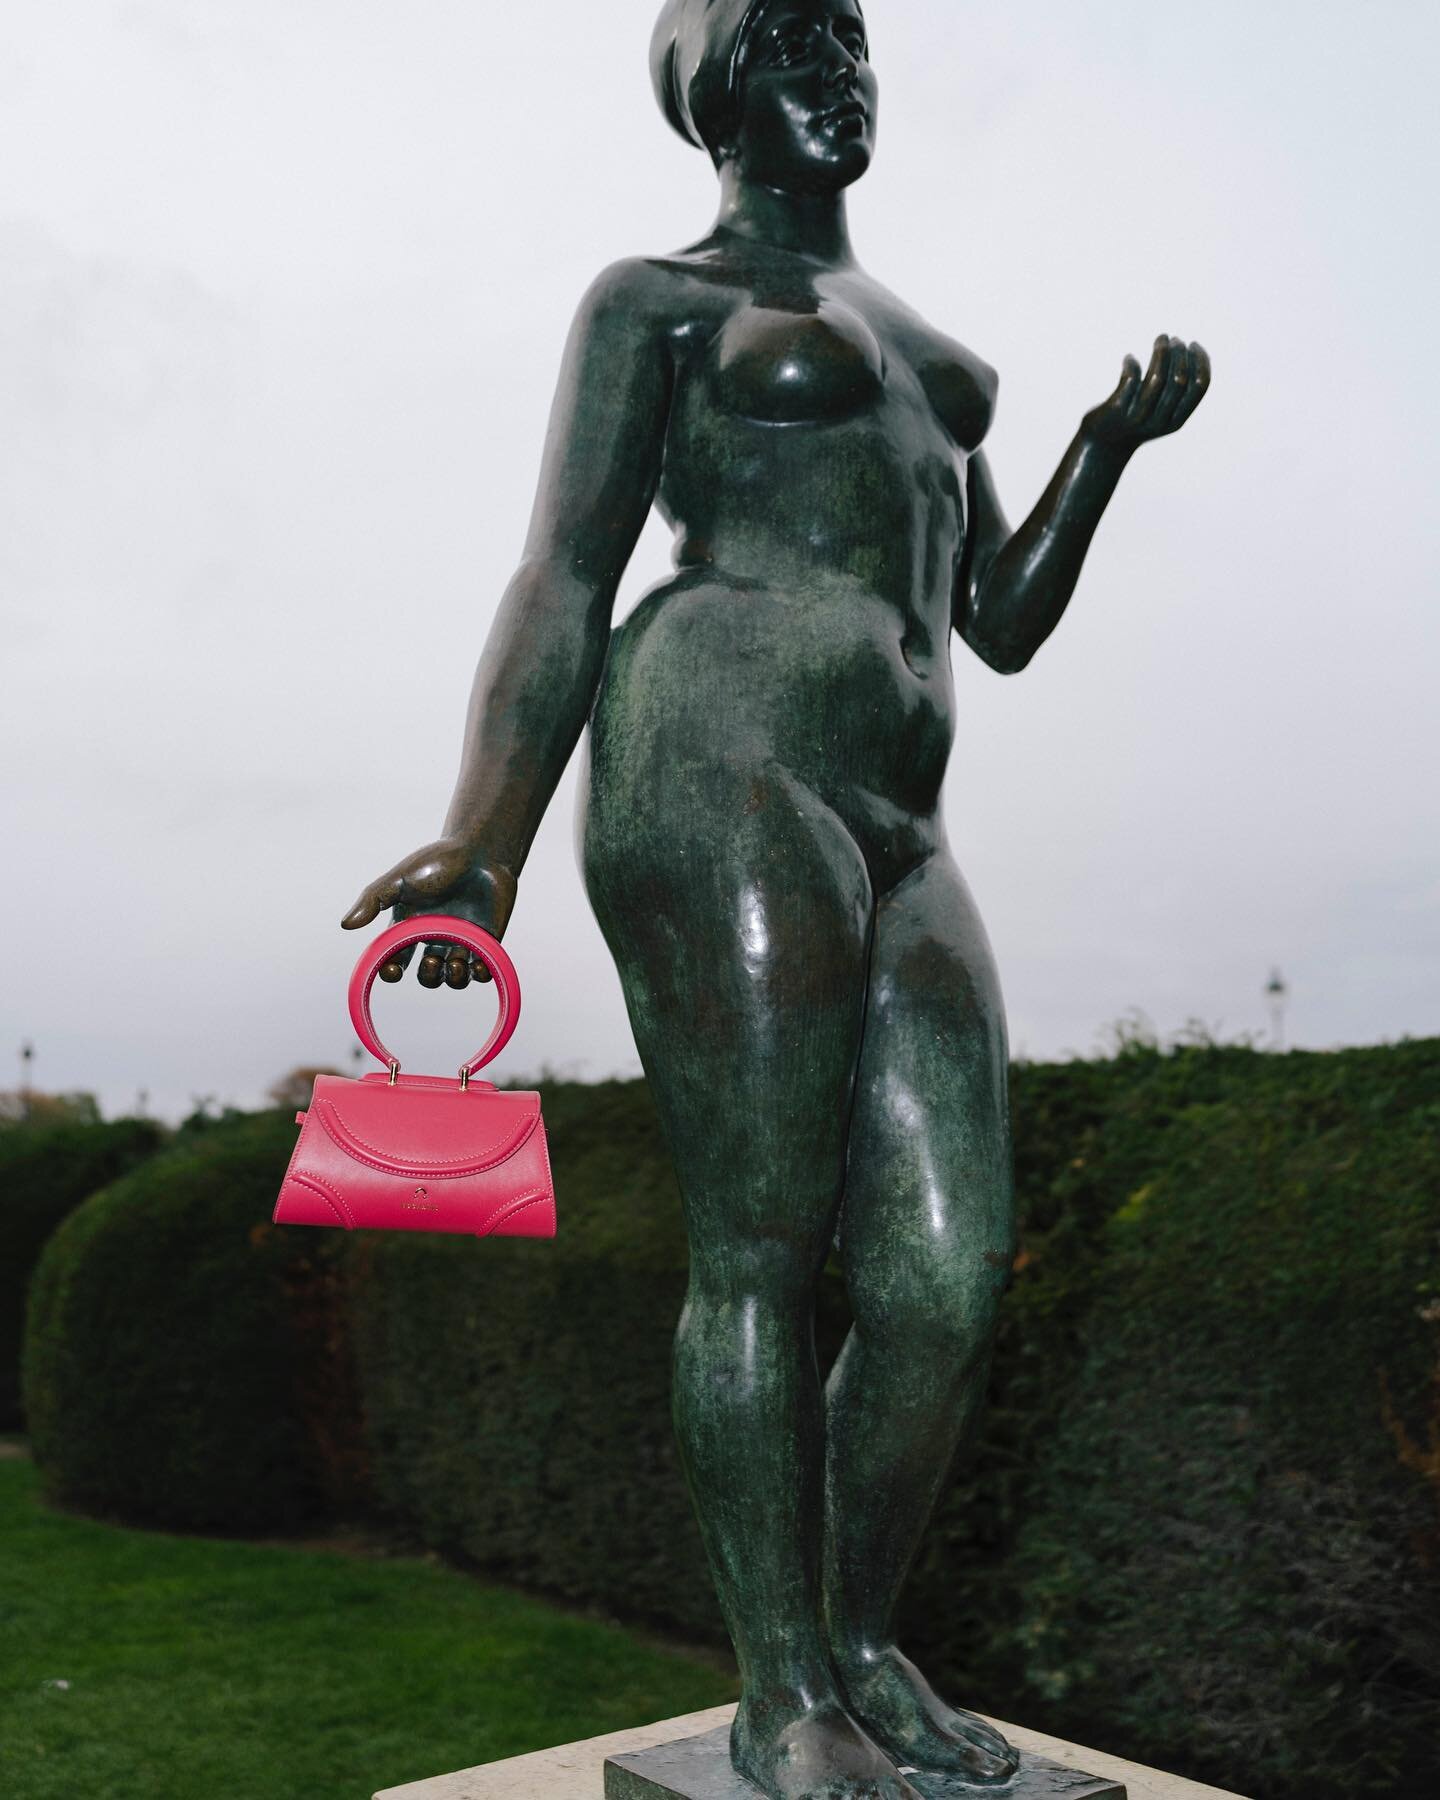 Channeling sculptural vibes with our pink Tube Bag, inspired by avant-garde master Constantin Br&acirc;ncusi. Where fashion meets art in a perfect blend. 🌸👜 #ArtfulFashion #handBag #cochains